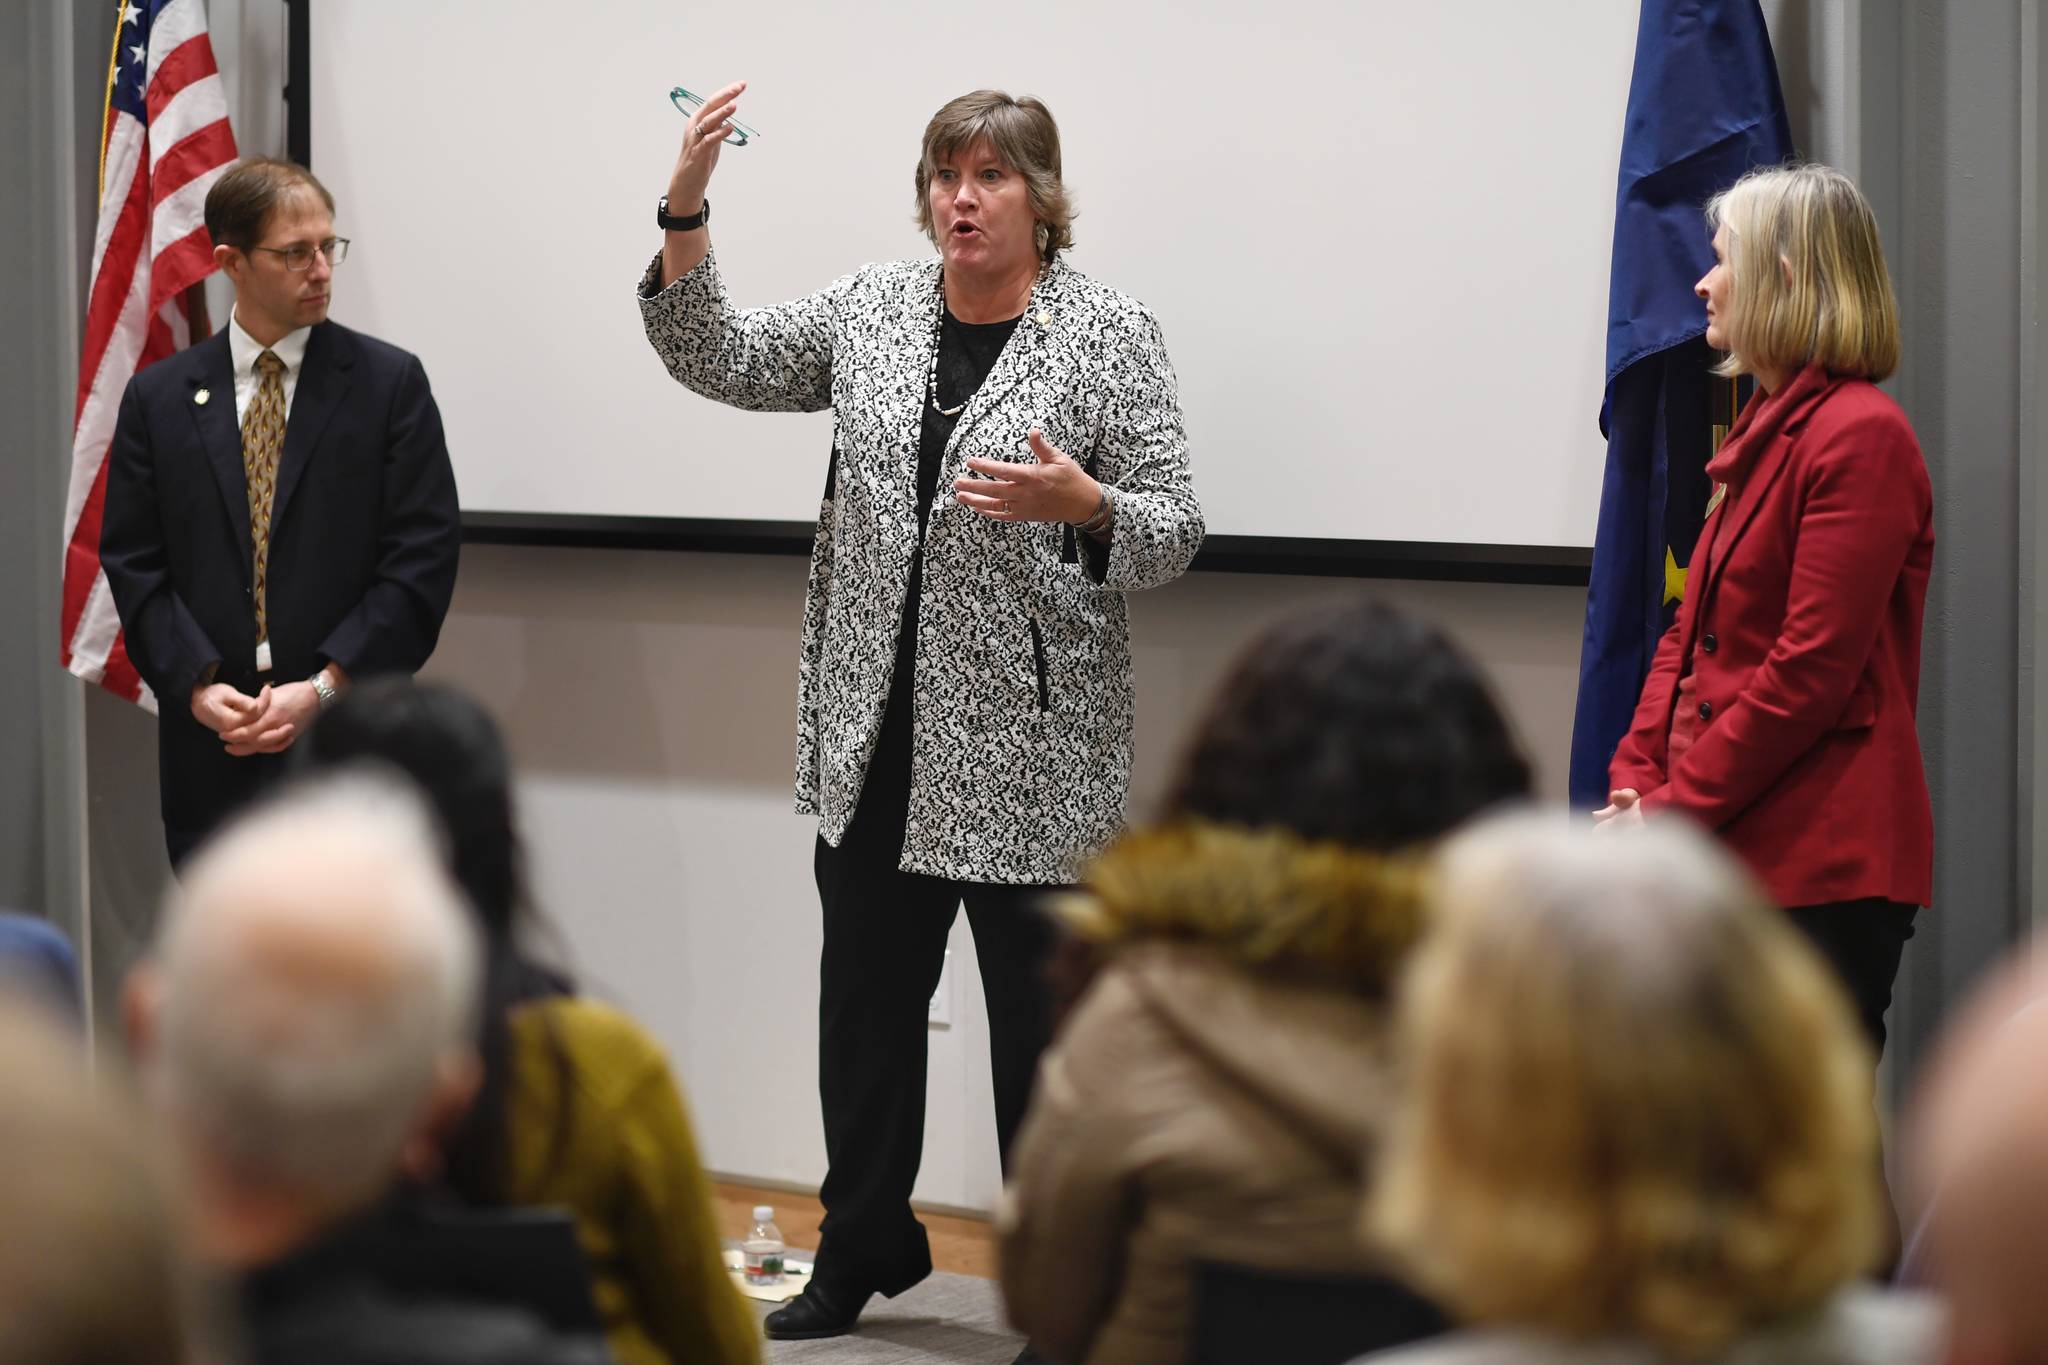 In this file photo, Rep. Sara Hannan, D-Juneau, center, answers a question as Sen. Jesse Kiehl, D-Juneau, left, and Rep. Andi Story, D-Juneau, wait their turn during a standing-room only town hall meeting at the Mendenhall Valley Public Library on Tuesday, Jan. 29, 2019. (Michael Penn | Juneau Empire)